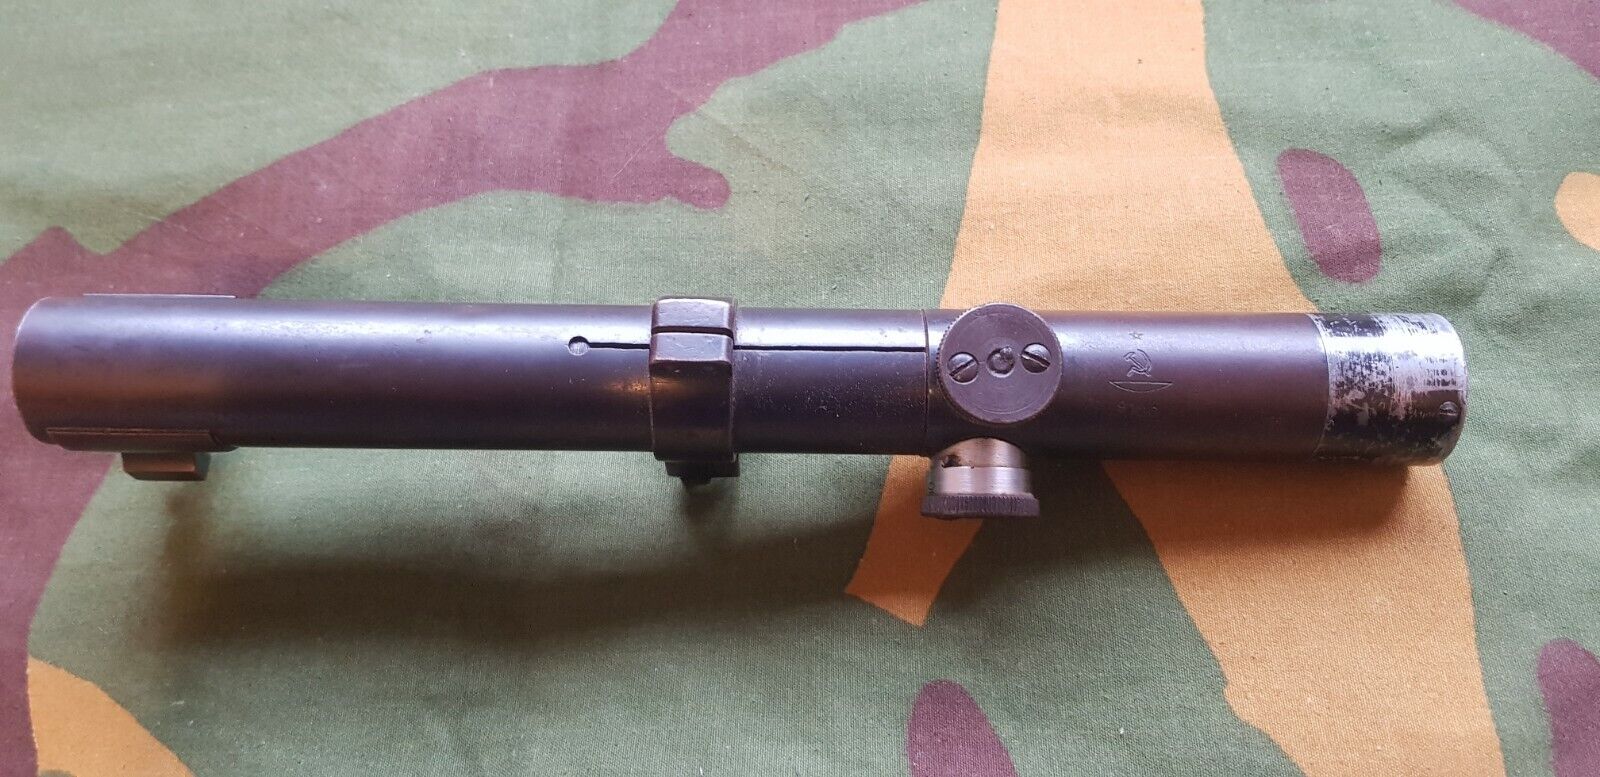 VERY RARE WITH FACTORY ADAPTER MOUNT SSSR MOSIN NAGANT WW2 RIFLE 